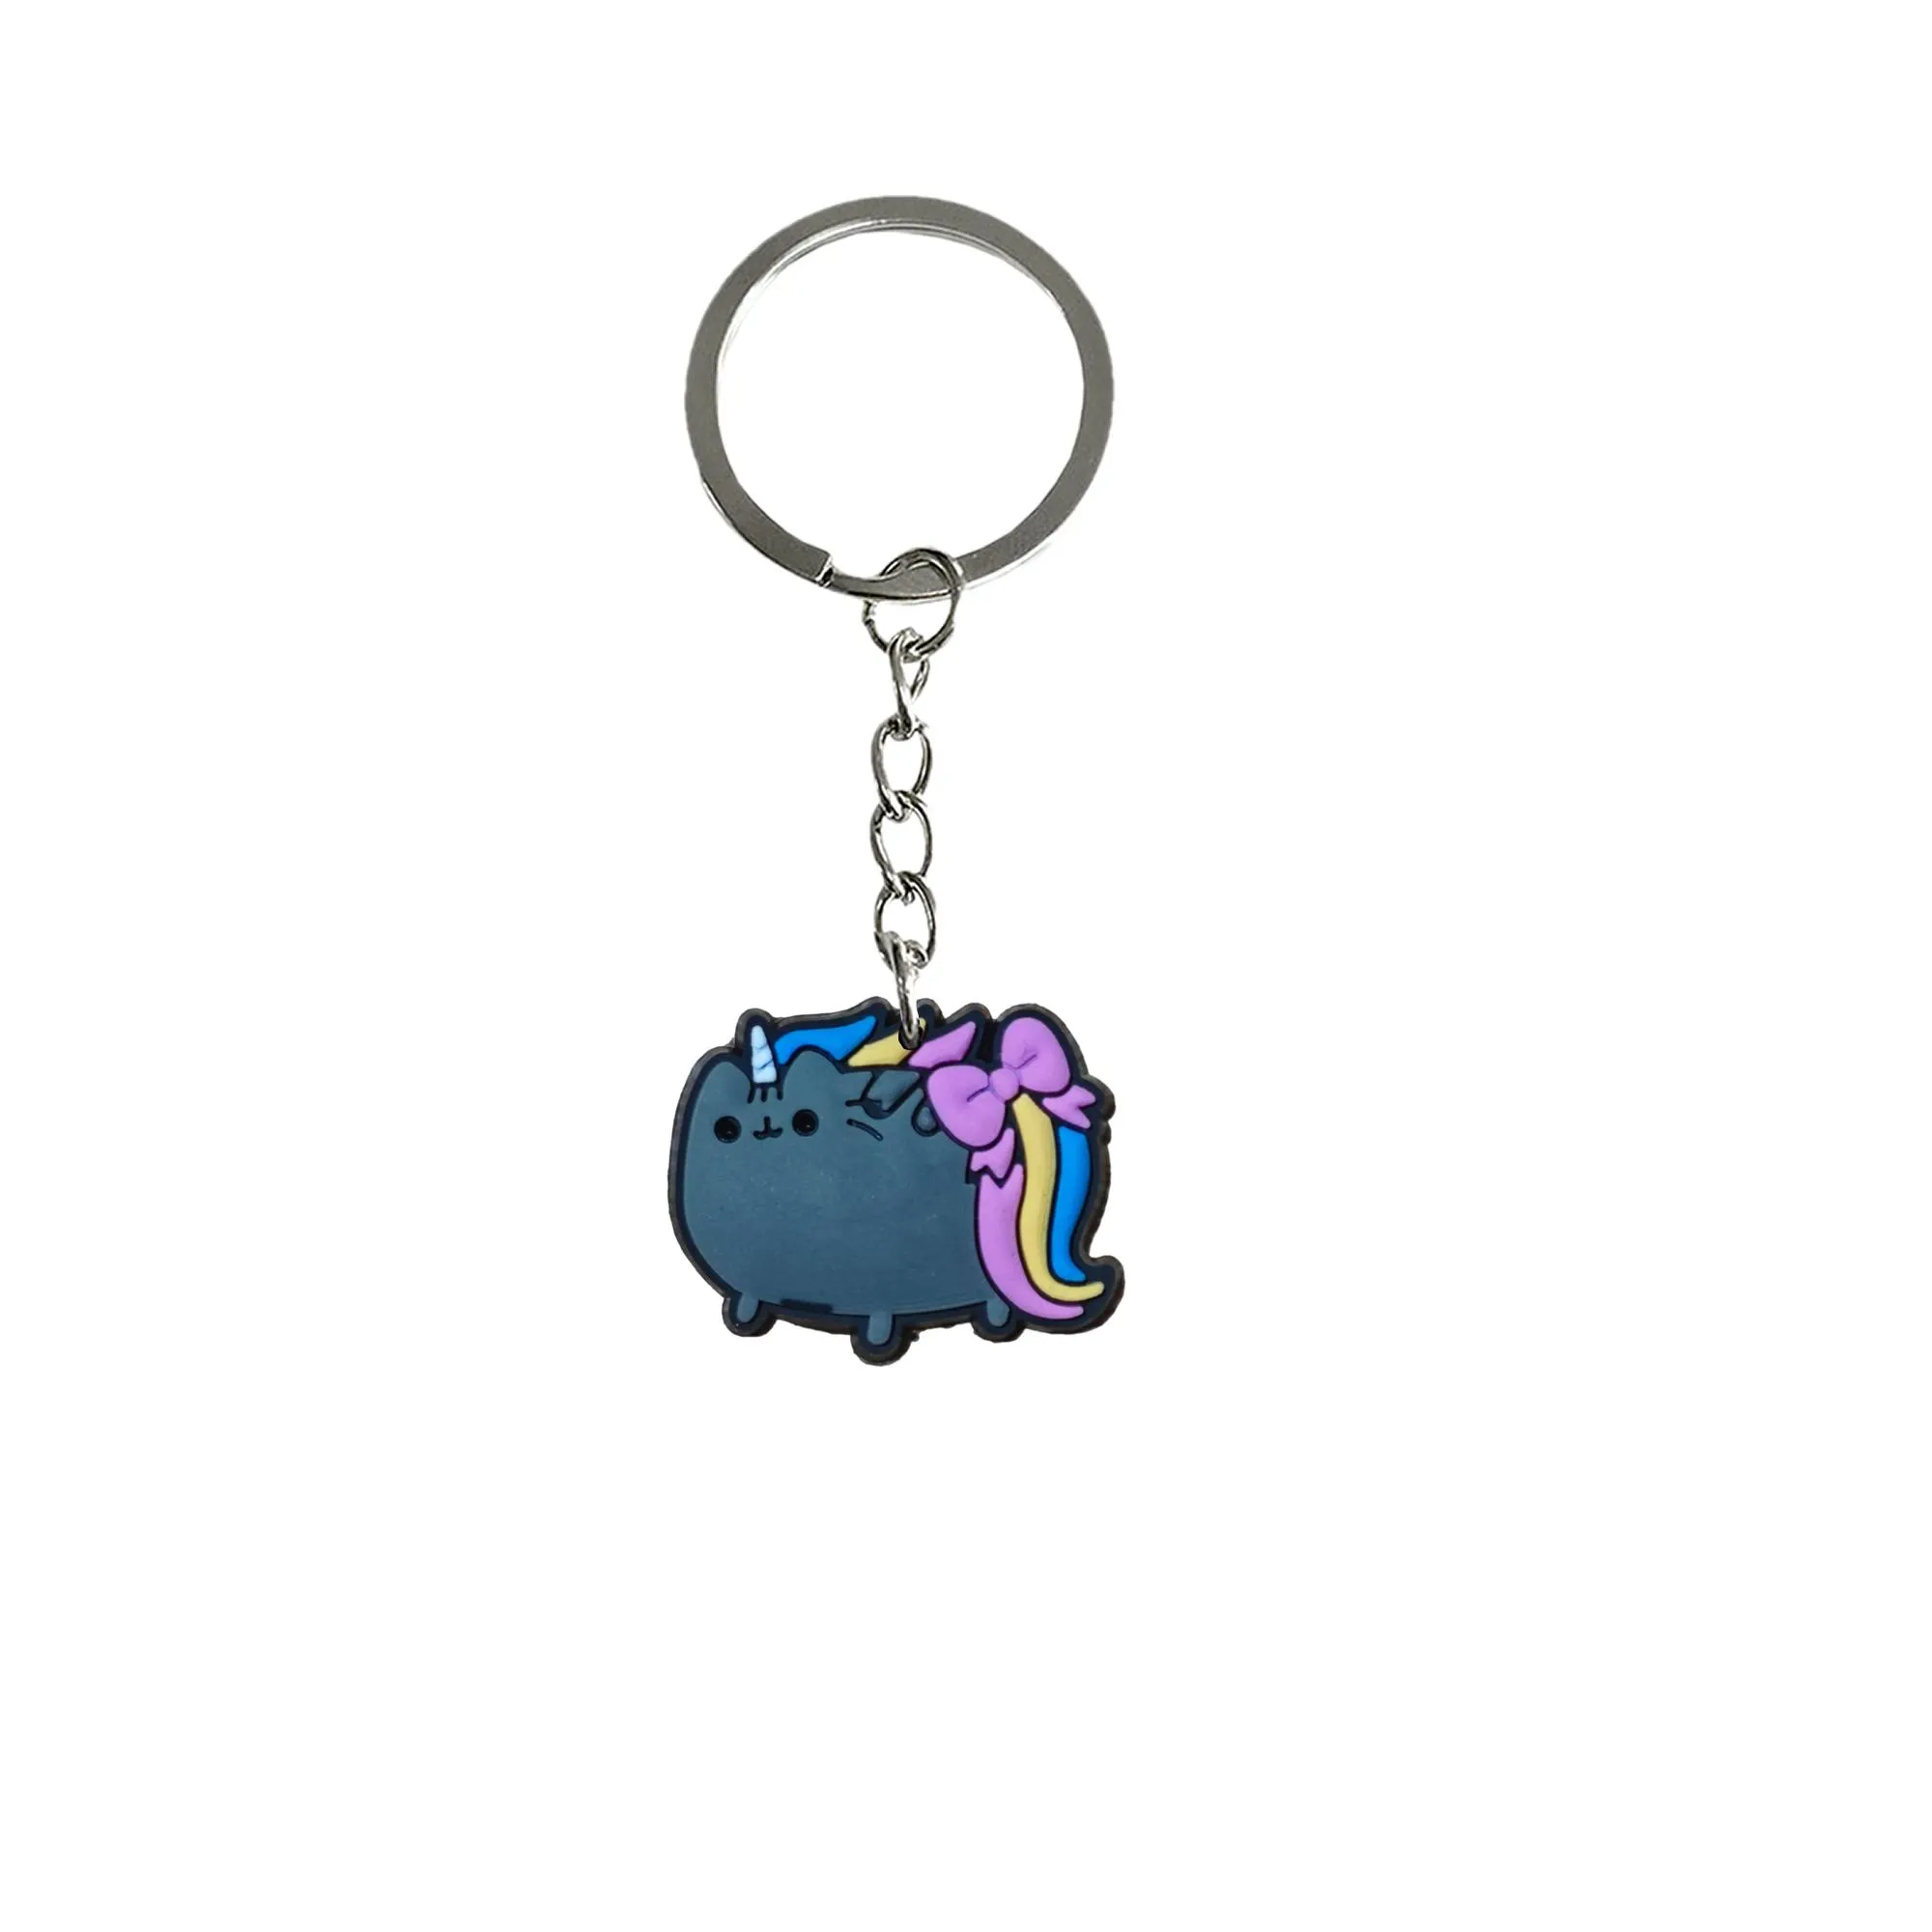 cats and keychain for kids party favors keychains men key chain girls keyring suitable schoolbag backpack shoulder bag pendant accessories charm